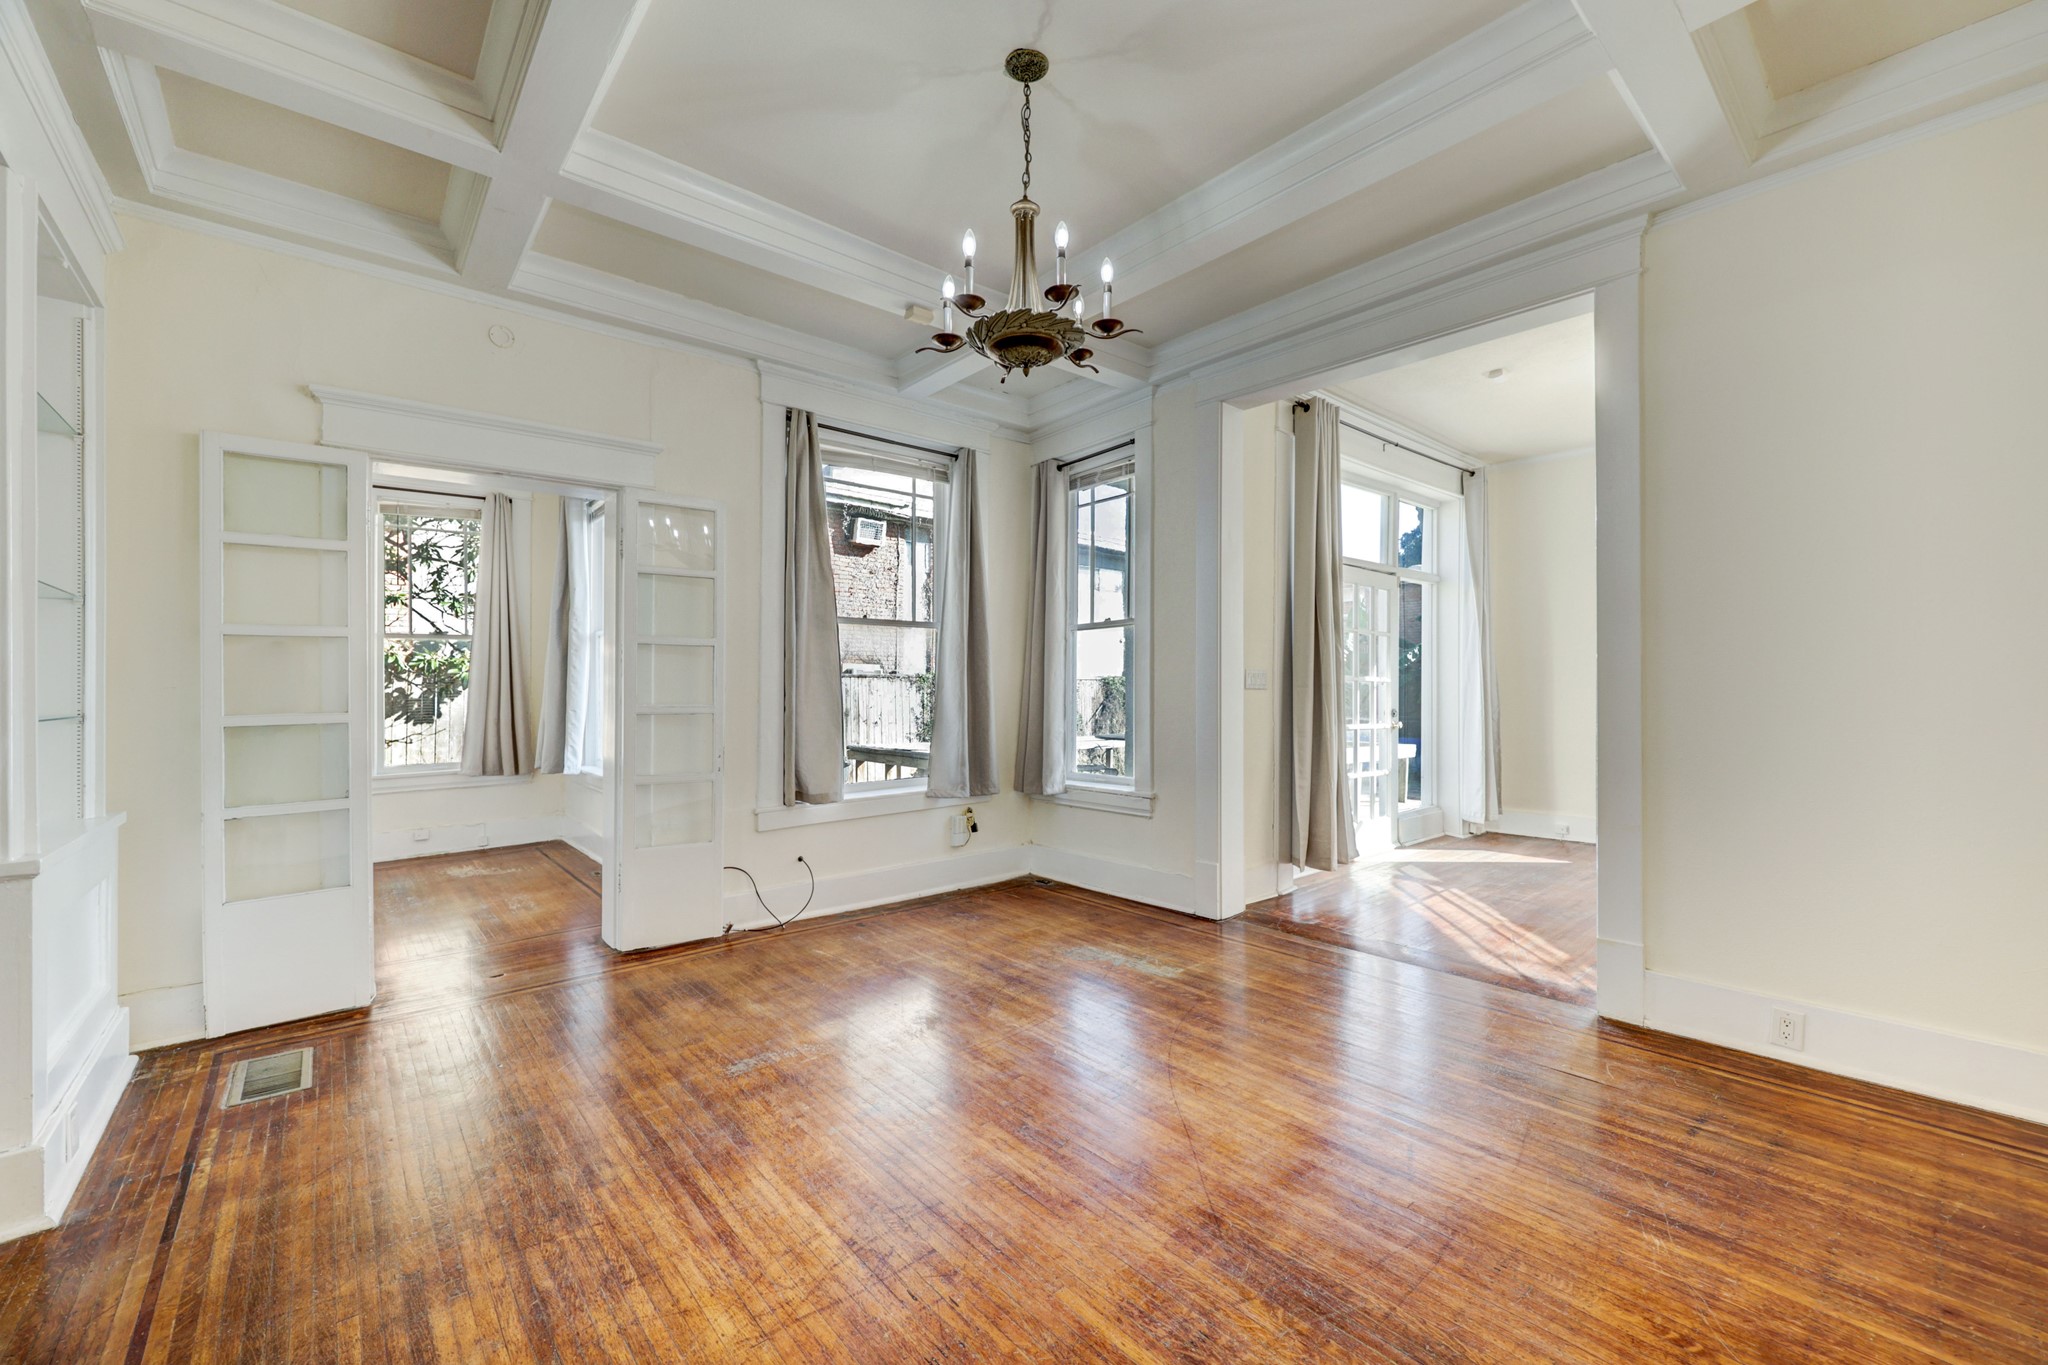 A view of the formal dining area.  Complete with coffered ceilings, built-ins and original hardwood floors.